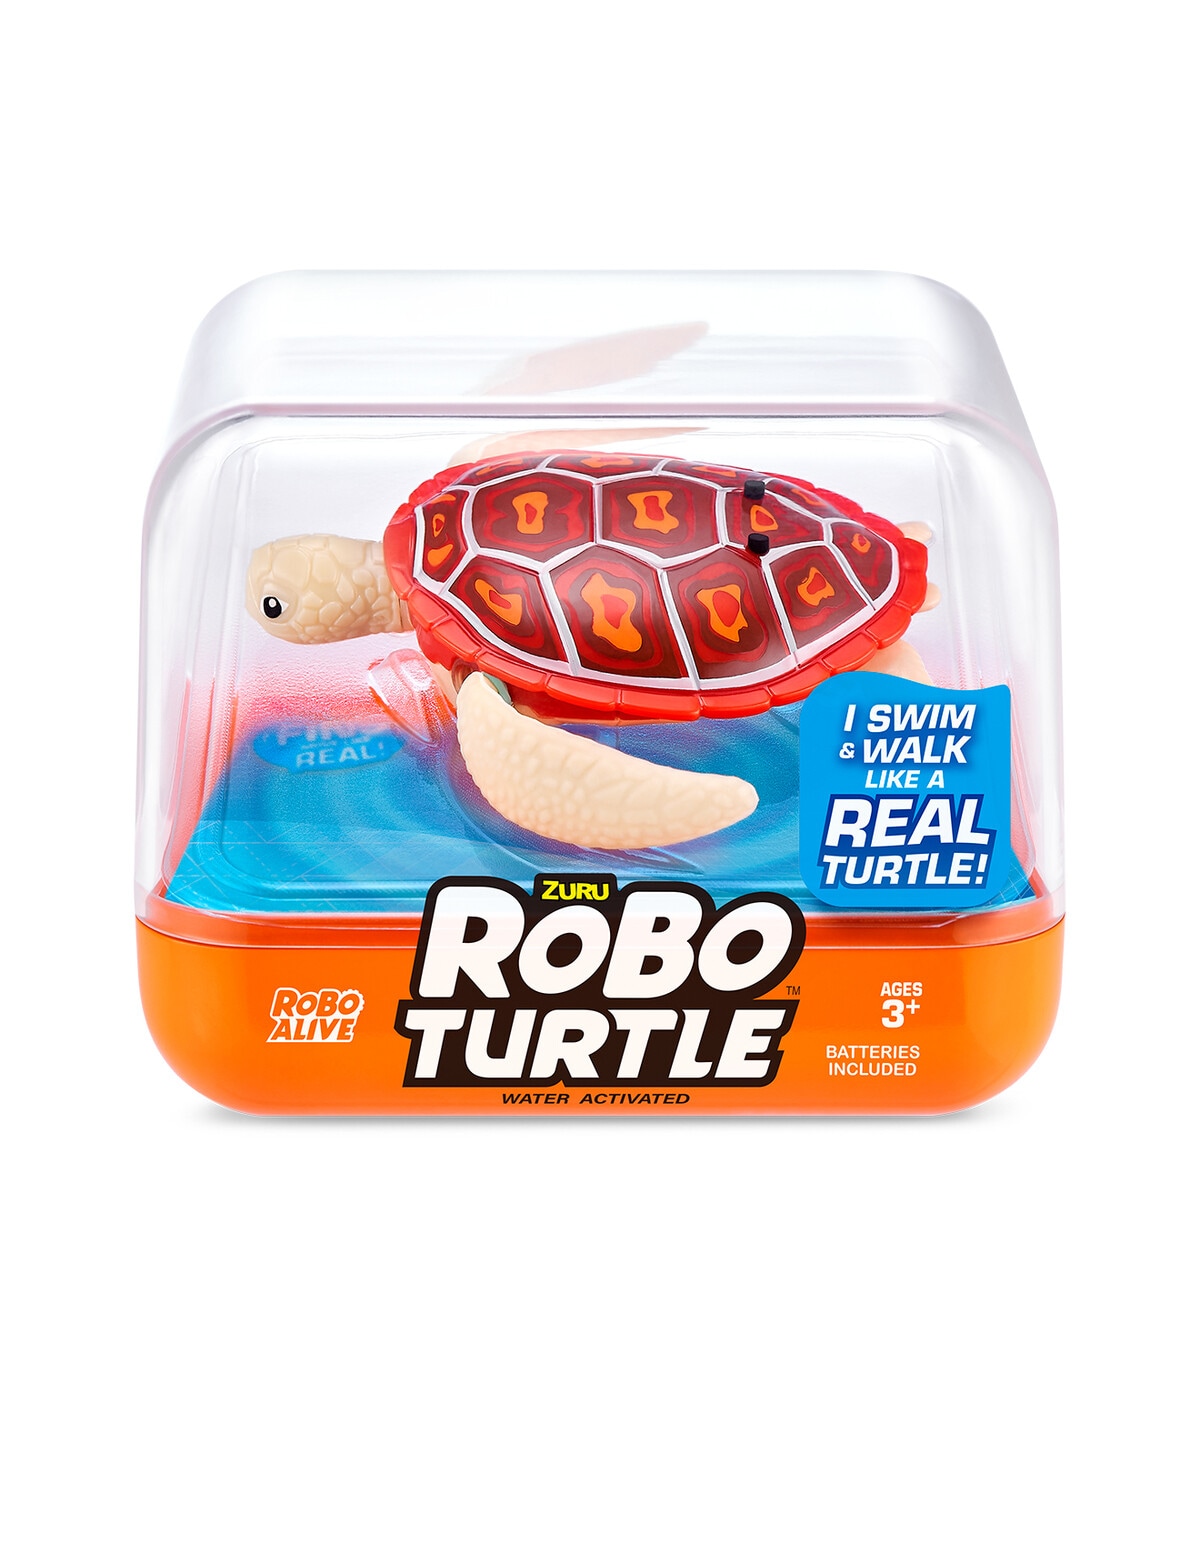 ROBO ALIVE Robo Turtle Robotic Swimming Turtle (Orange + Blue) by ZURU  Water Activated, Comes with Batteries,  Exclusive (2 Pack)